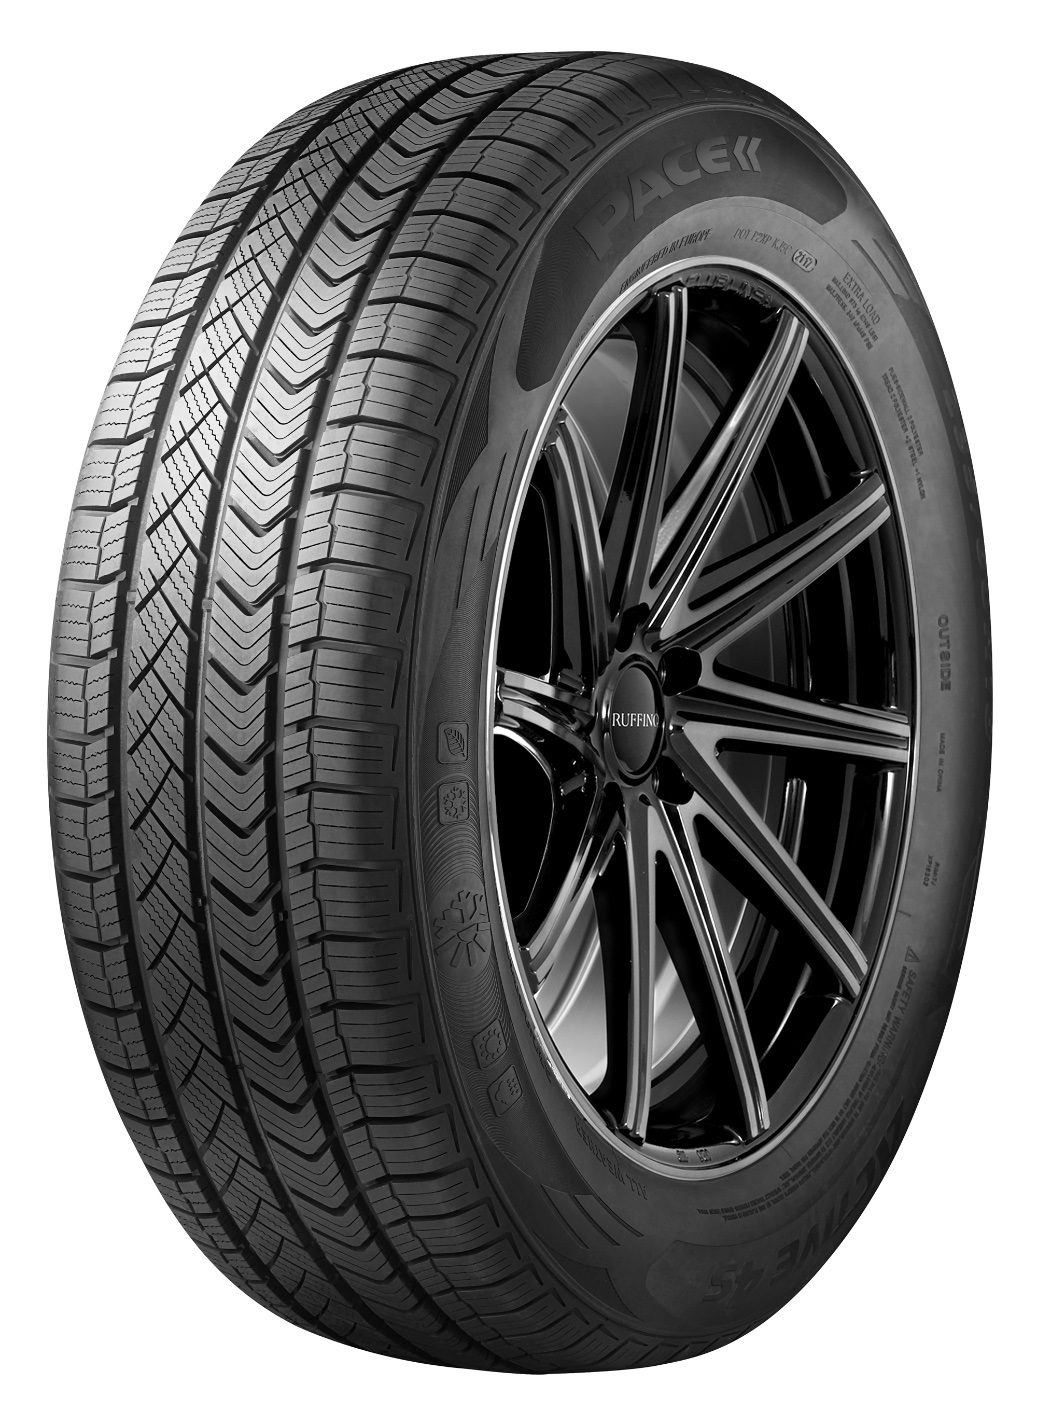 Gomme Nuove Pace 155/65 R14 75T ACTIVE 4S M+S pneumatici nuovi All Season